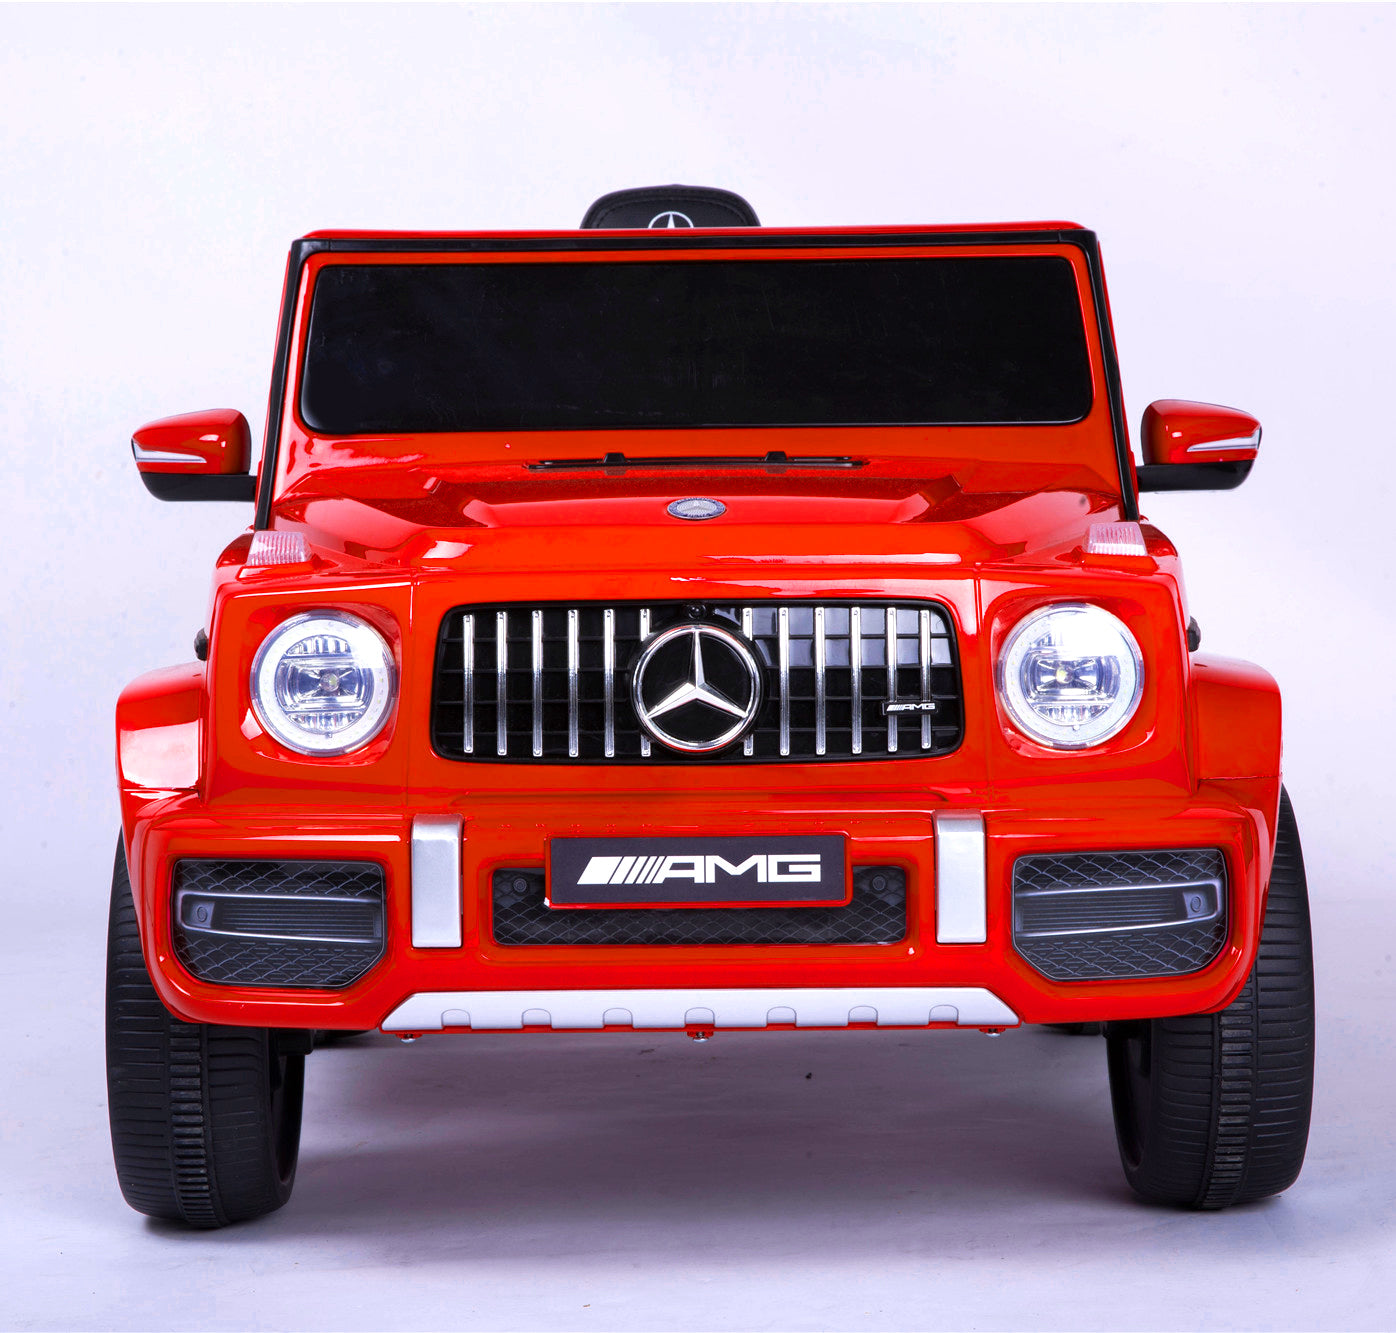 Licensed Mercedes-Benz G63 Kids Ride On Car, Kids Electric Car with Remote Control   12V licensed children car Motorized Vehicles for Girls and Boys, gift, Music, Horn, Spring Suspension, Safety Lock